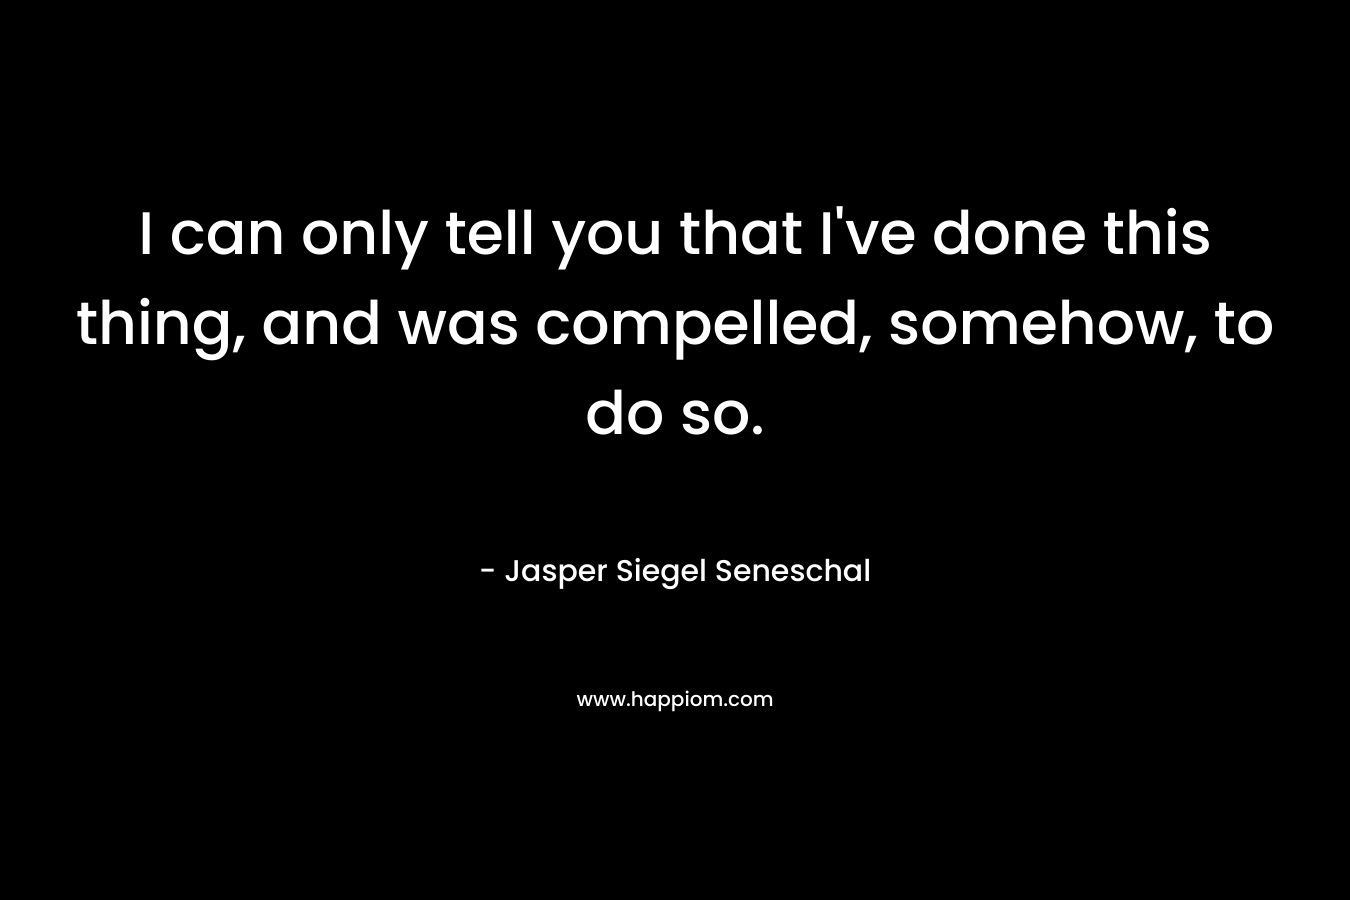 I can only tell you that I’ve done this thing, and was compelled, somehow, to do so. – Jasper Siegel Seneschal